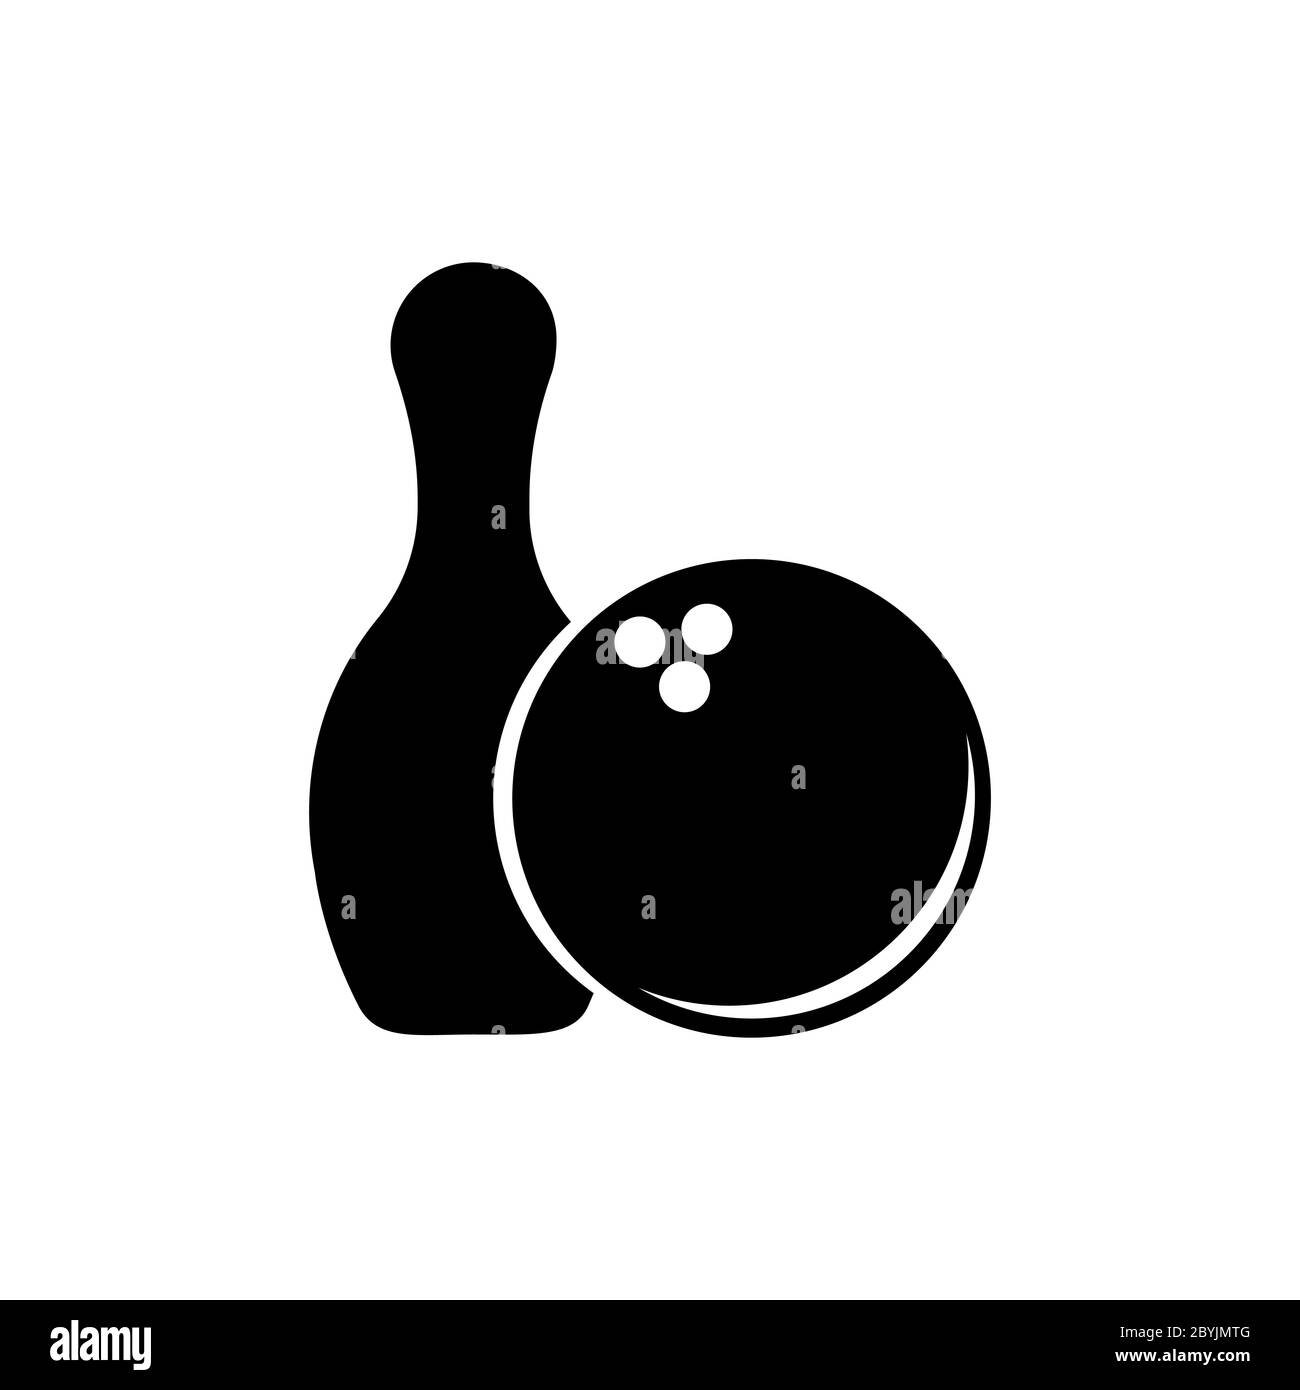 Bowling ball icon vector in black on an isolated white background. EPS 10. Stock Vector